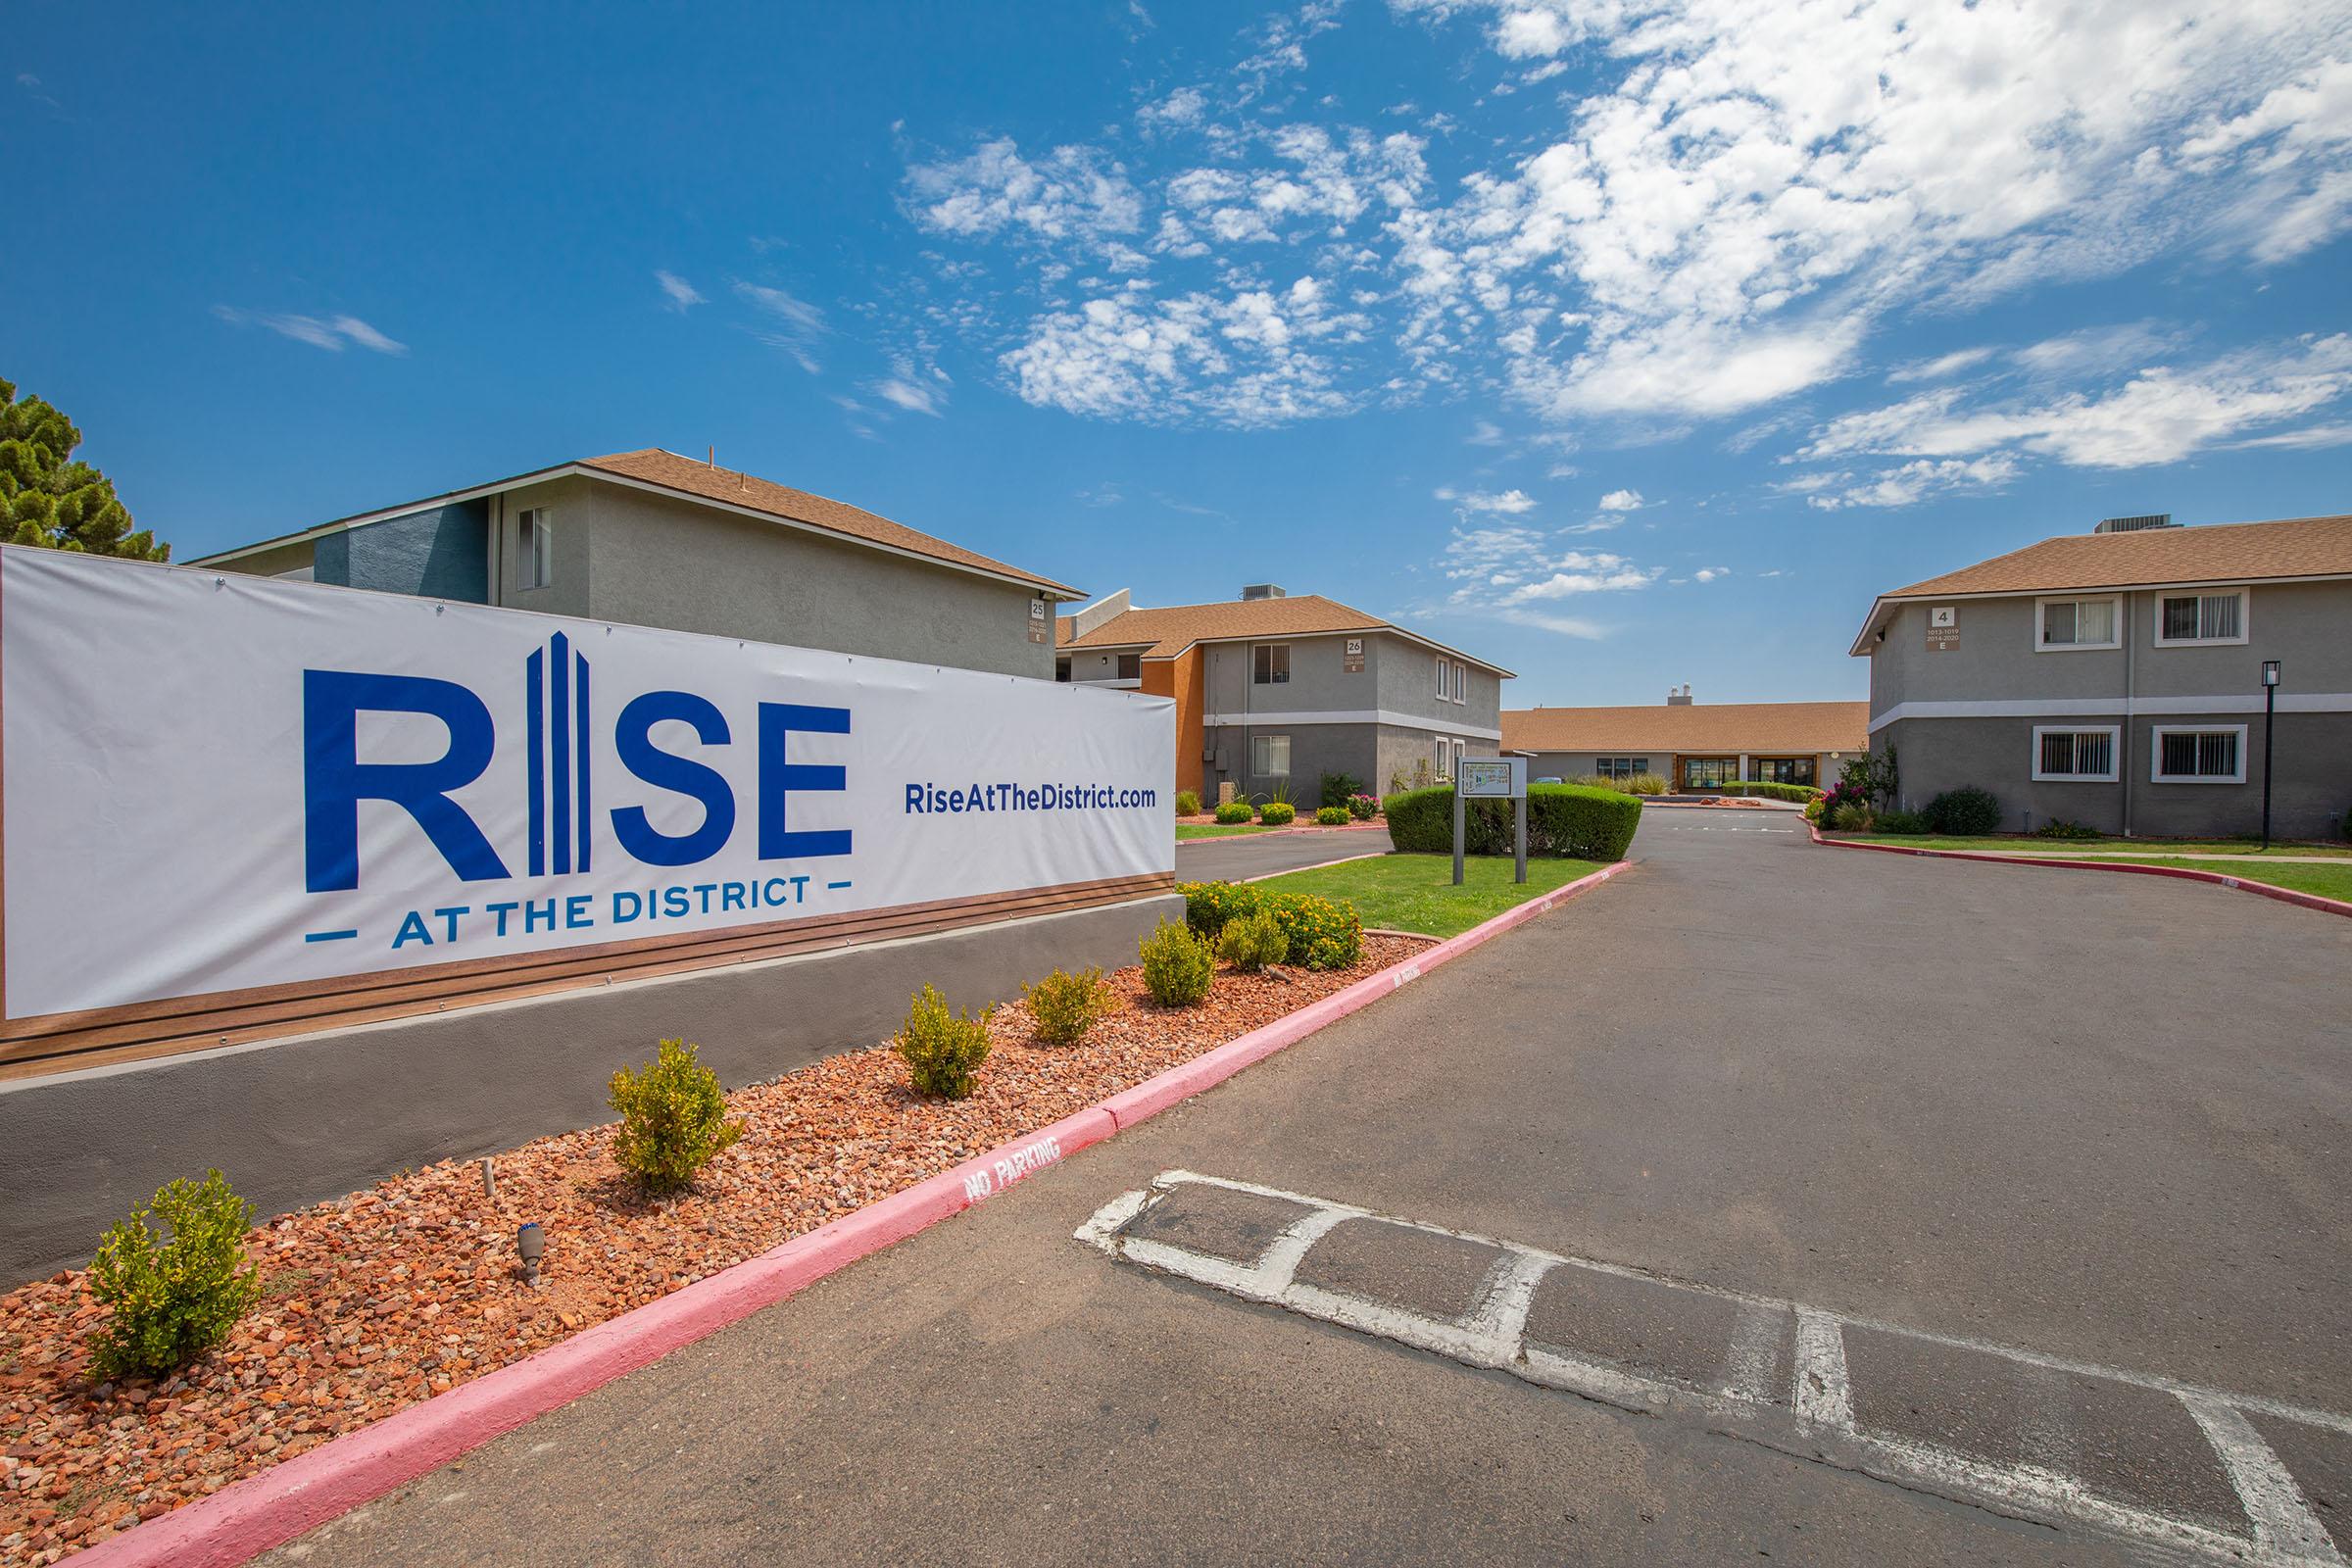 Rise at the District outdoor  welcome sign by the side of the road into the Mesa, AZ apartment complex